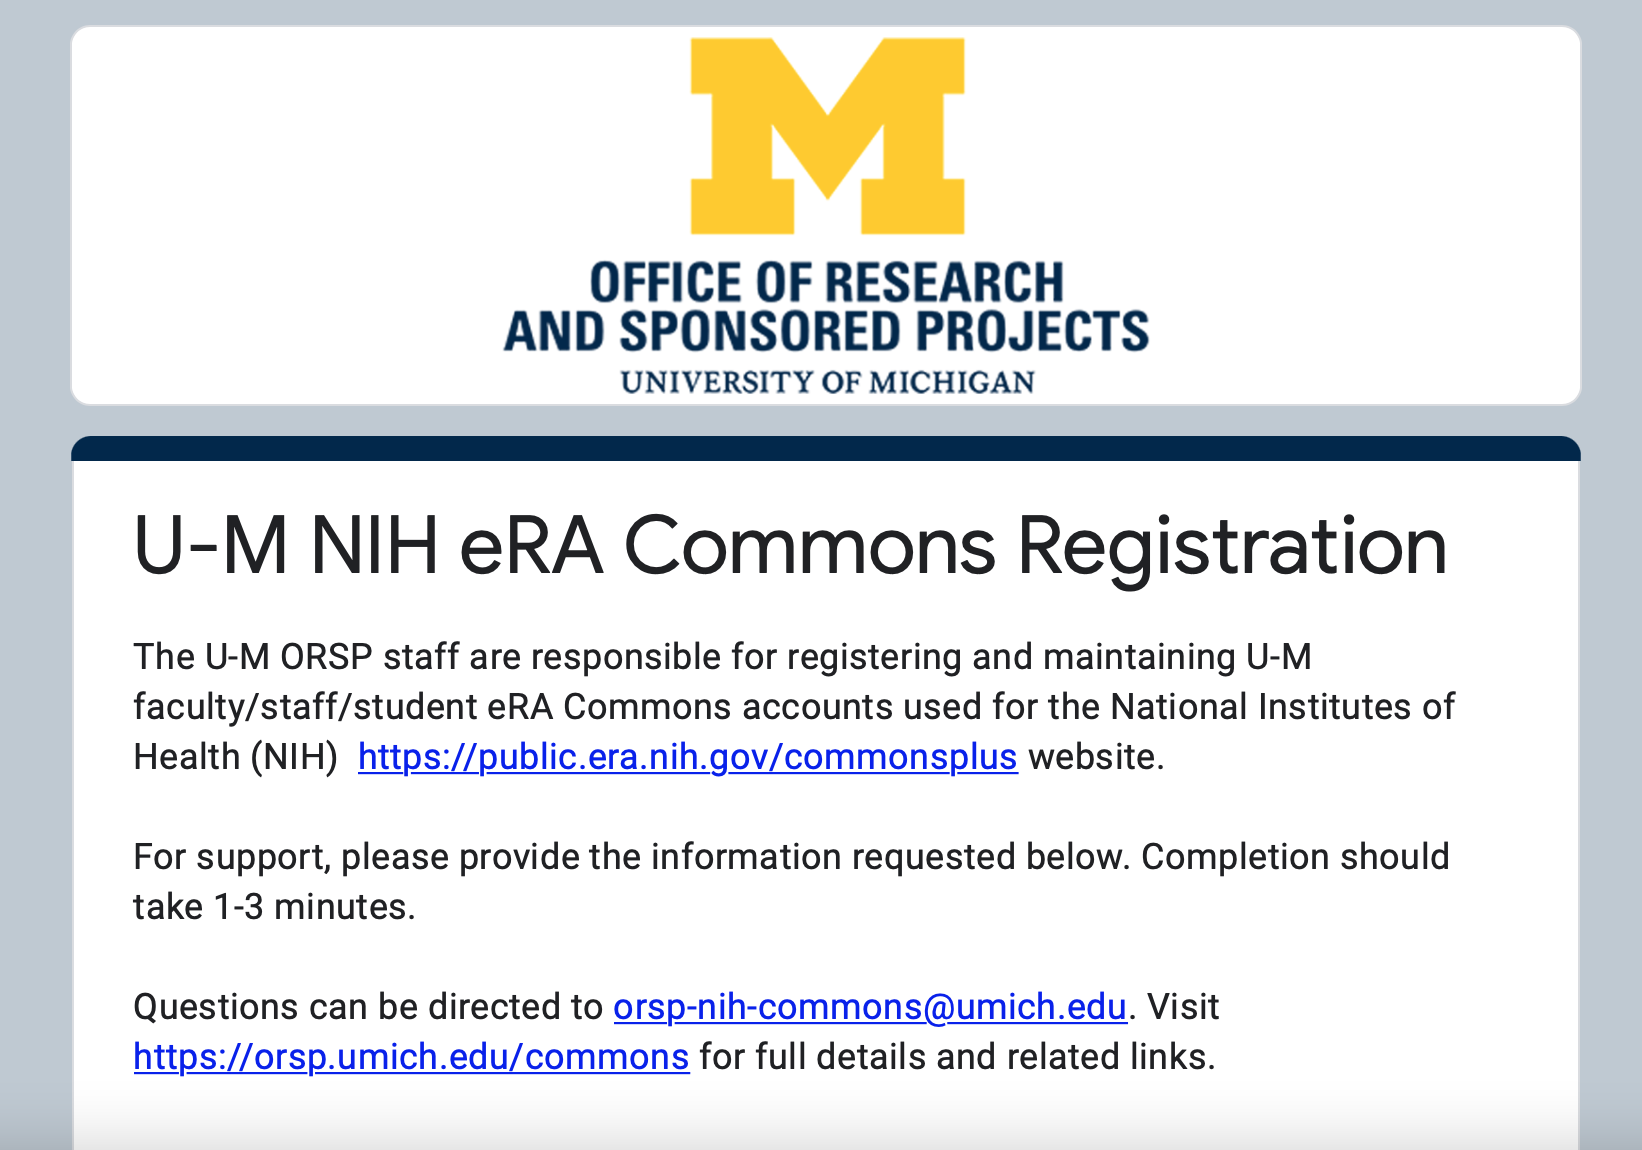 New NIH Commons Form for eRA